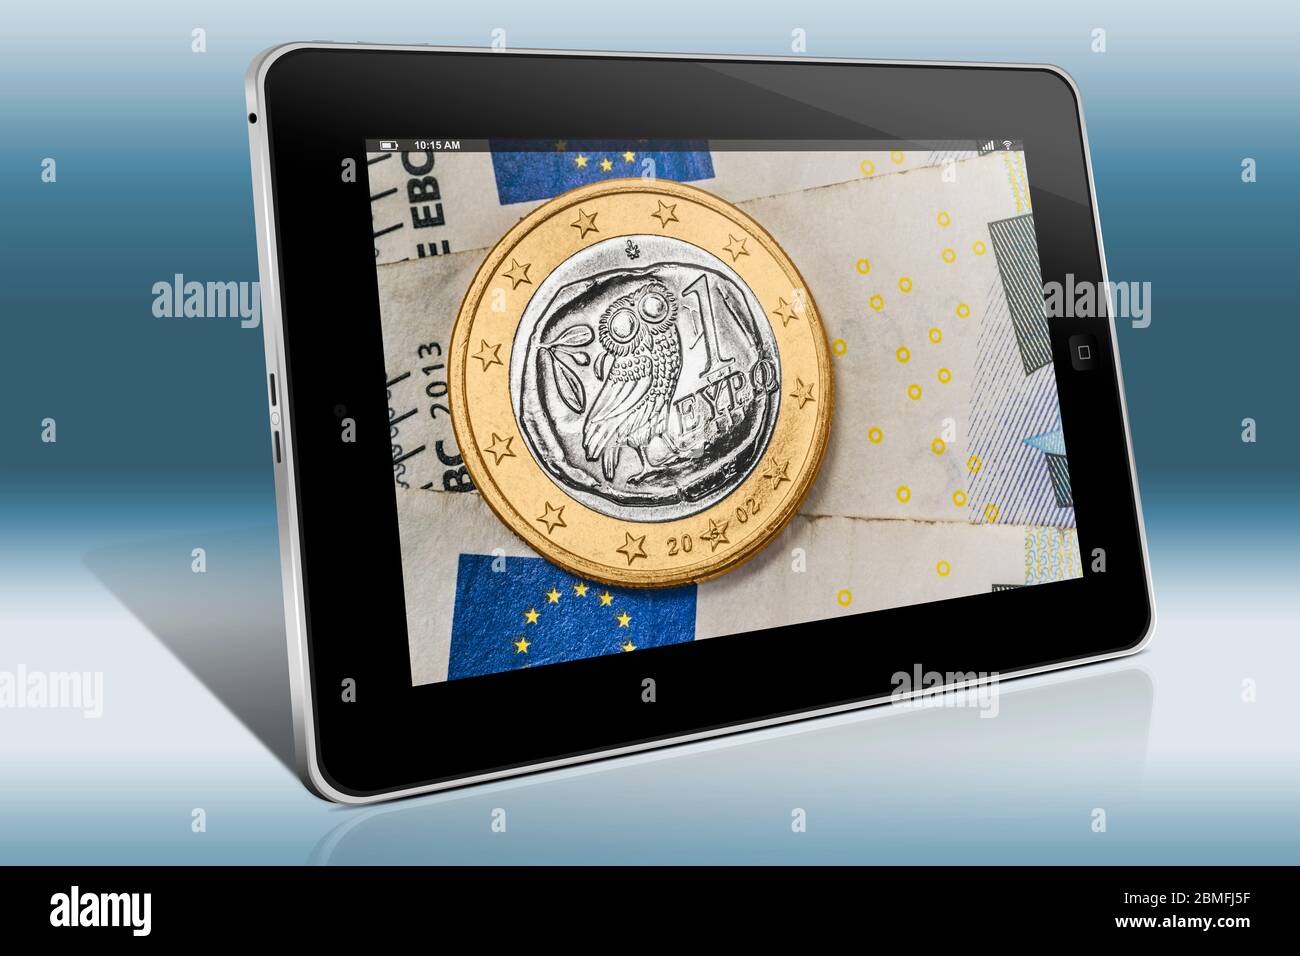 a 1 euro coin from Greece on euro banknotes, view on a Tablet PC Stock Photo